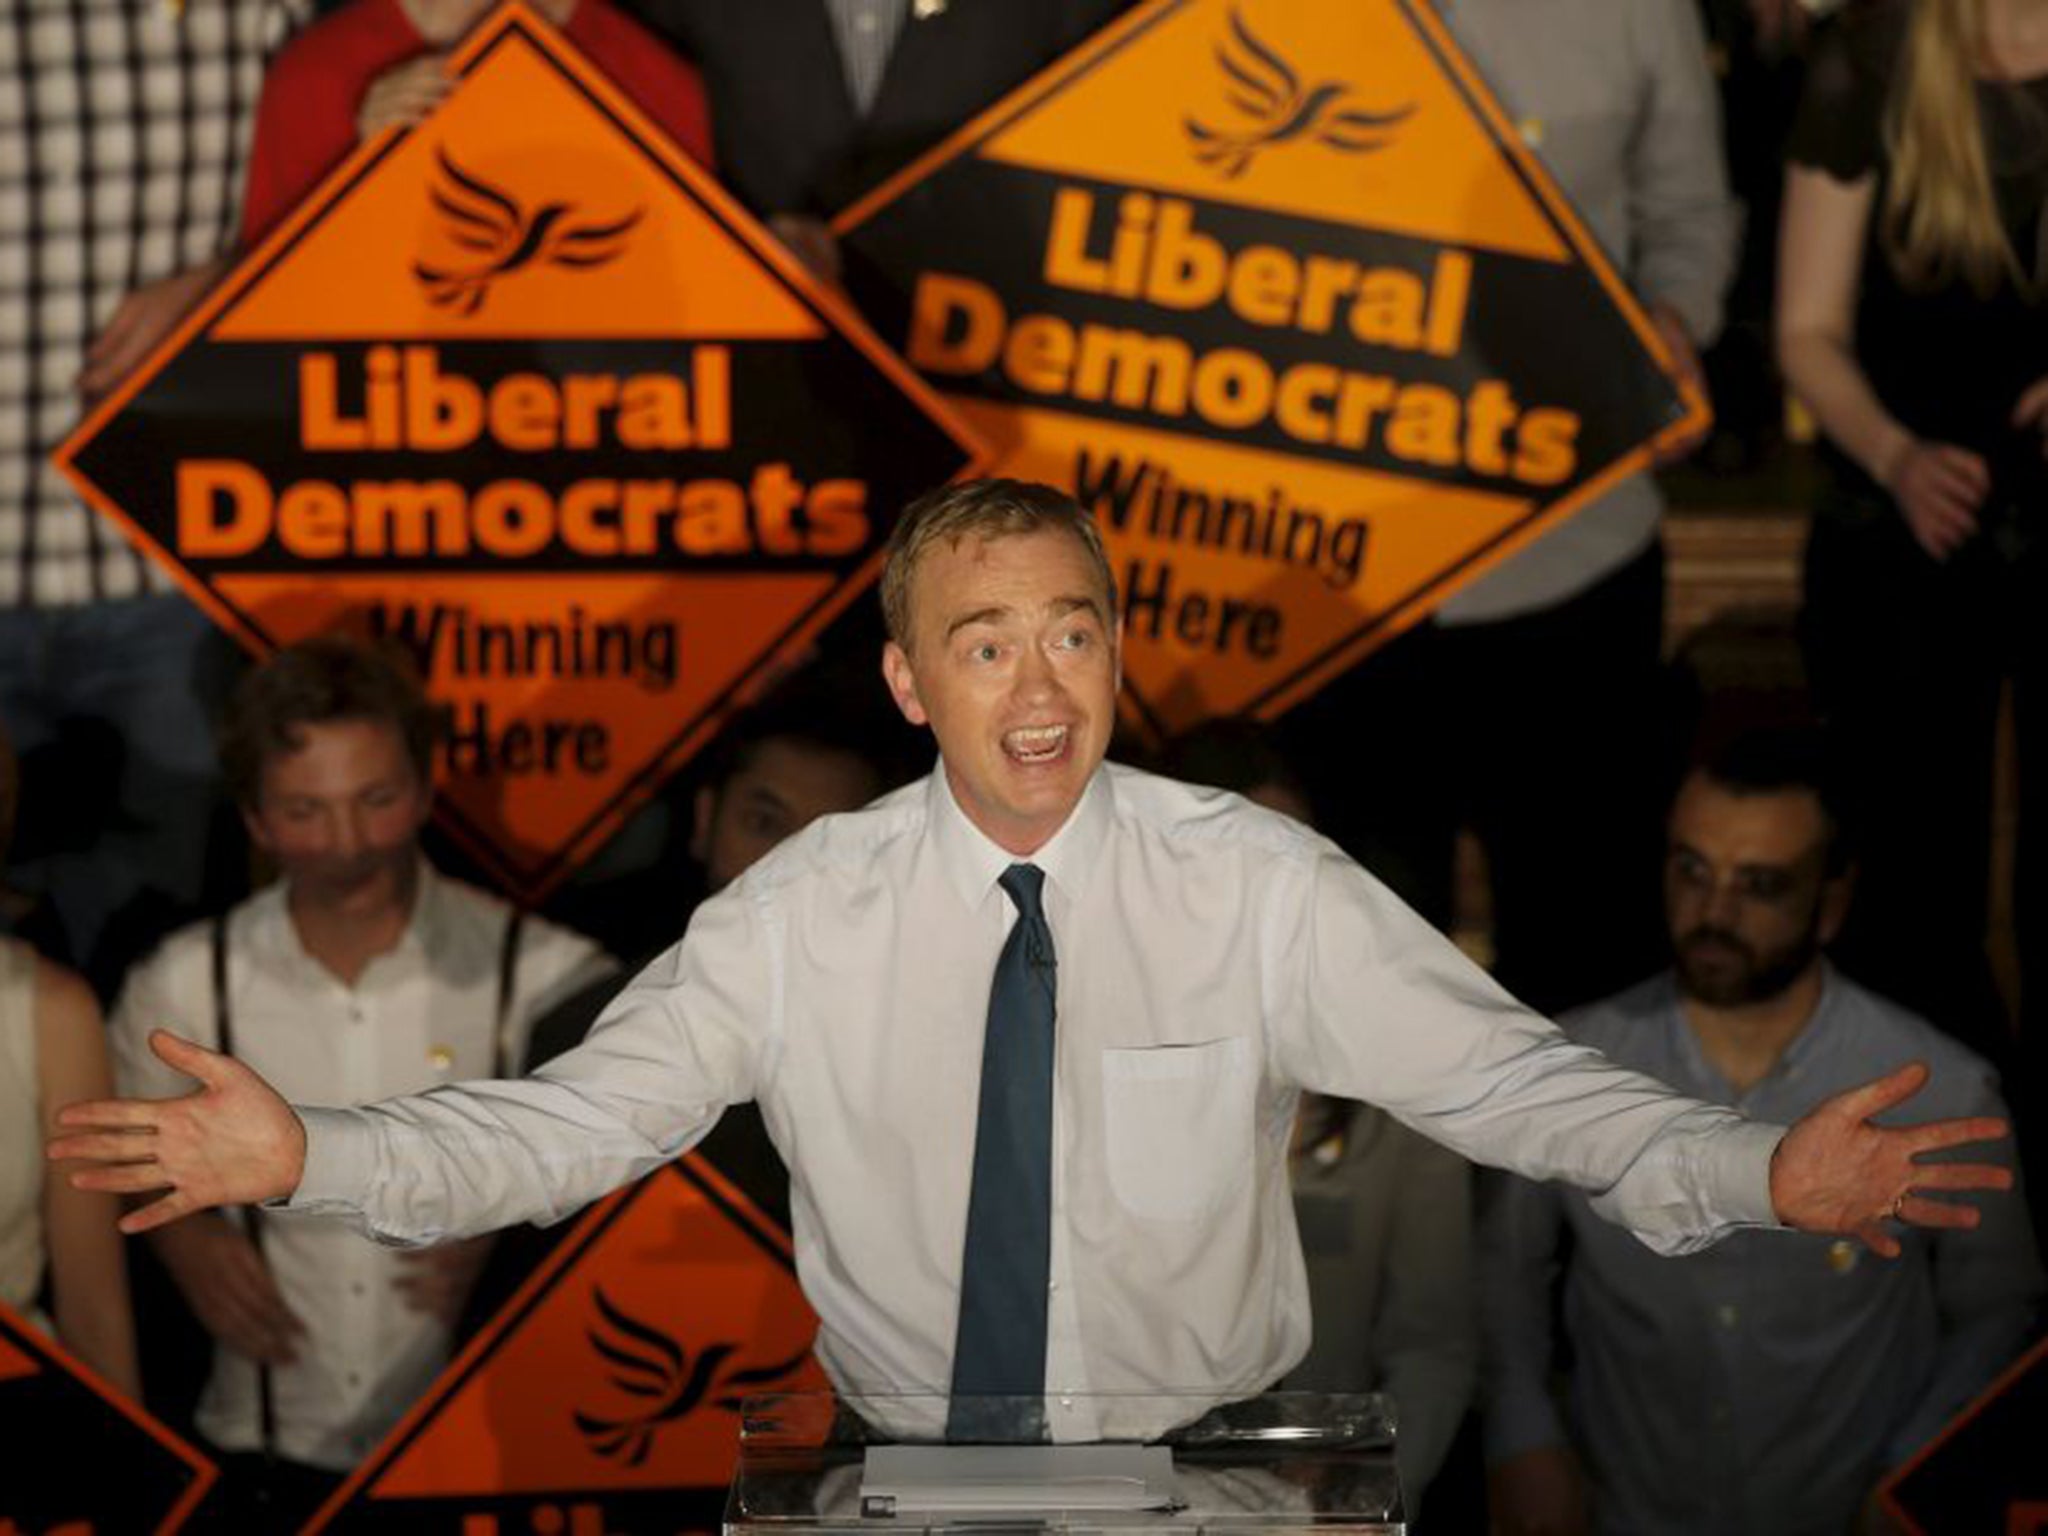 Newly elected Lib Dem leader Tim Farron told supporters at a rally in north London: "Revival is in our grasp. Have hope. Have courage. Have belief."